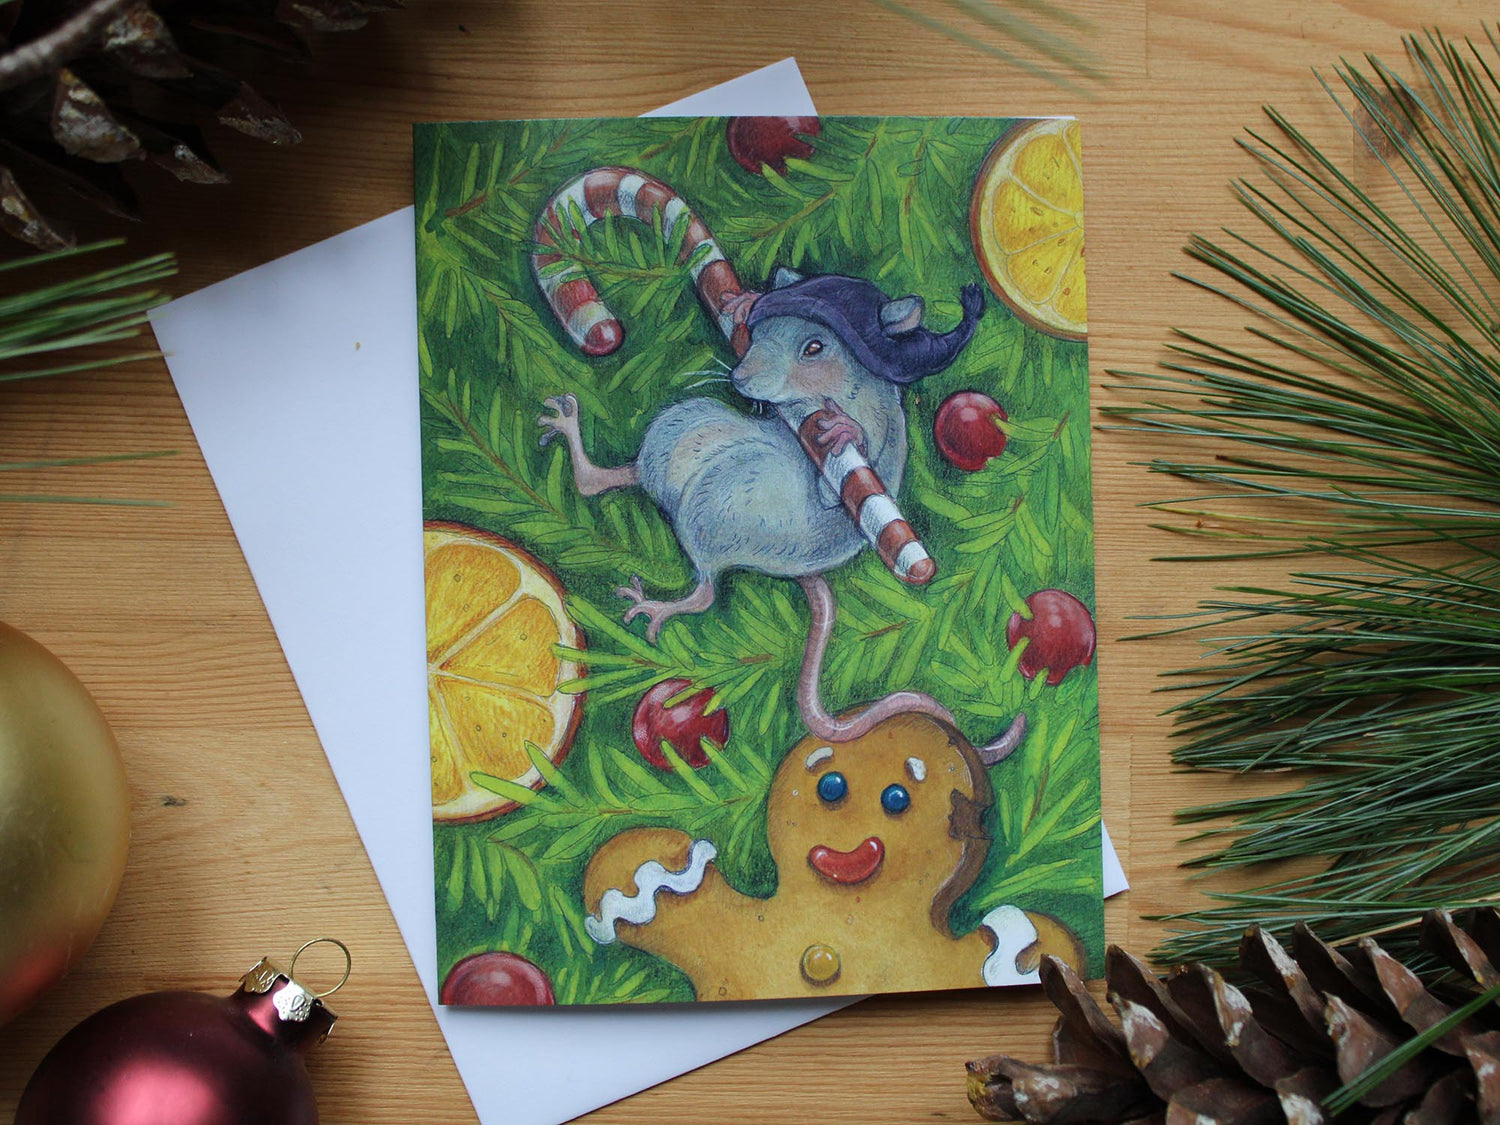 illustrated christmas cards of little mouse clinging to candy cane hanging in christmas tree. Decorated with cranberries , orange slices and gingerbread man.